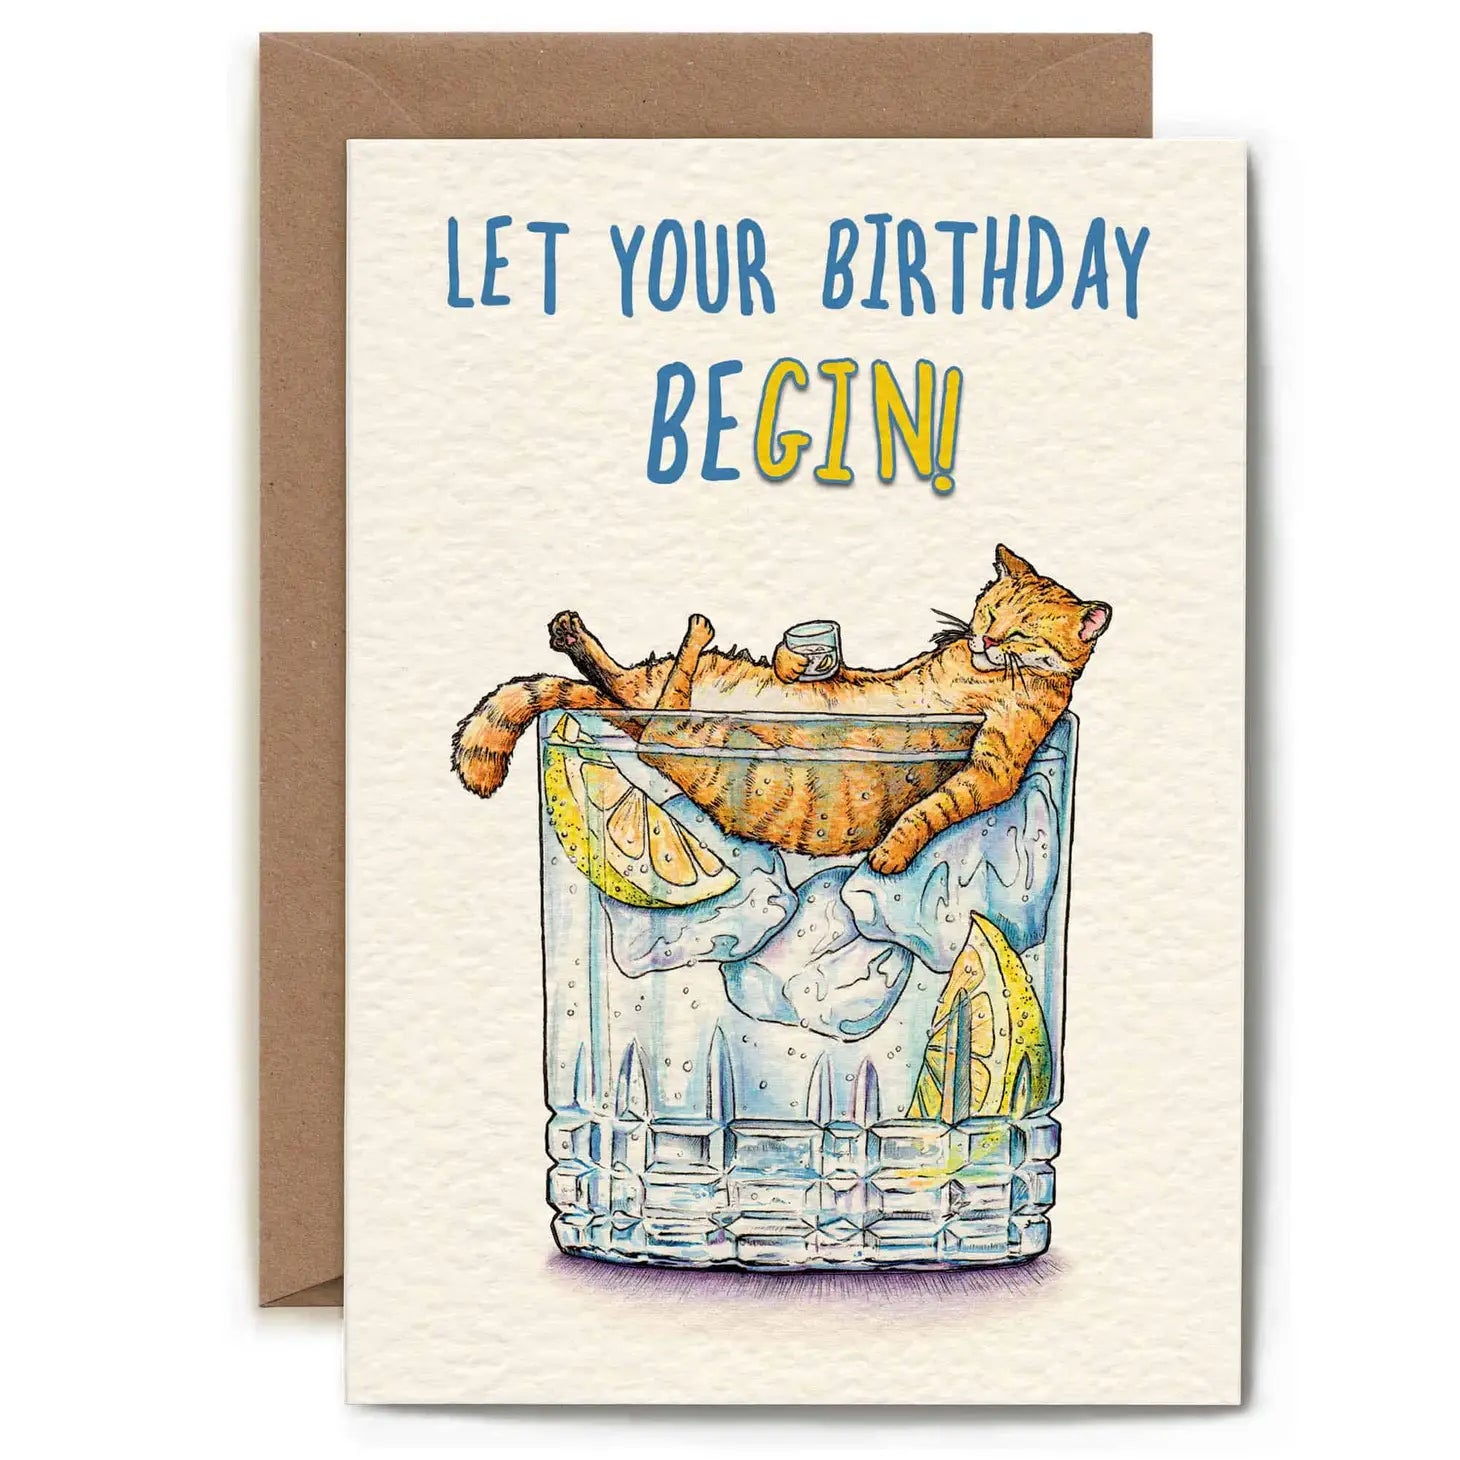 Greeting card "Let your birthday beGIN"